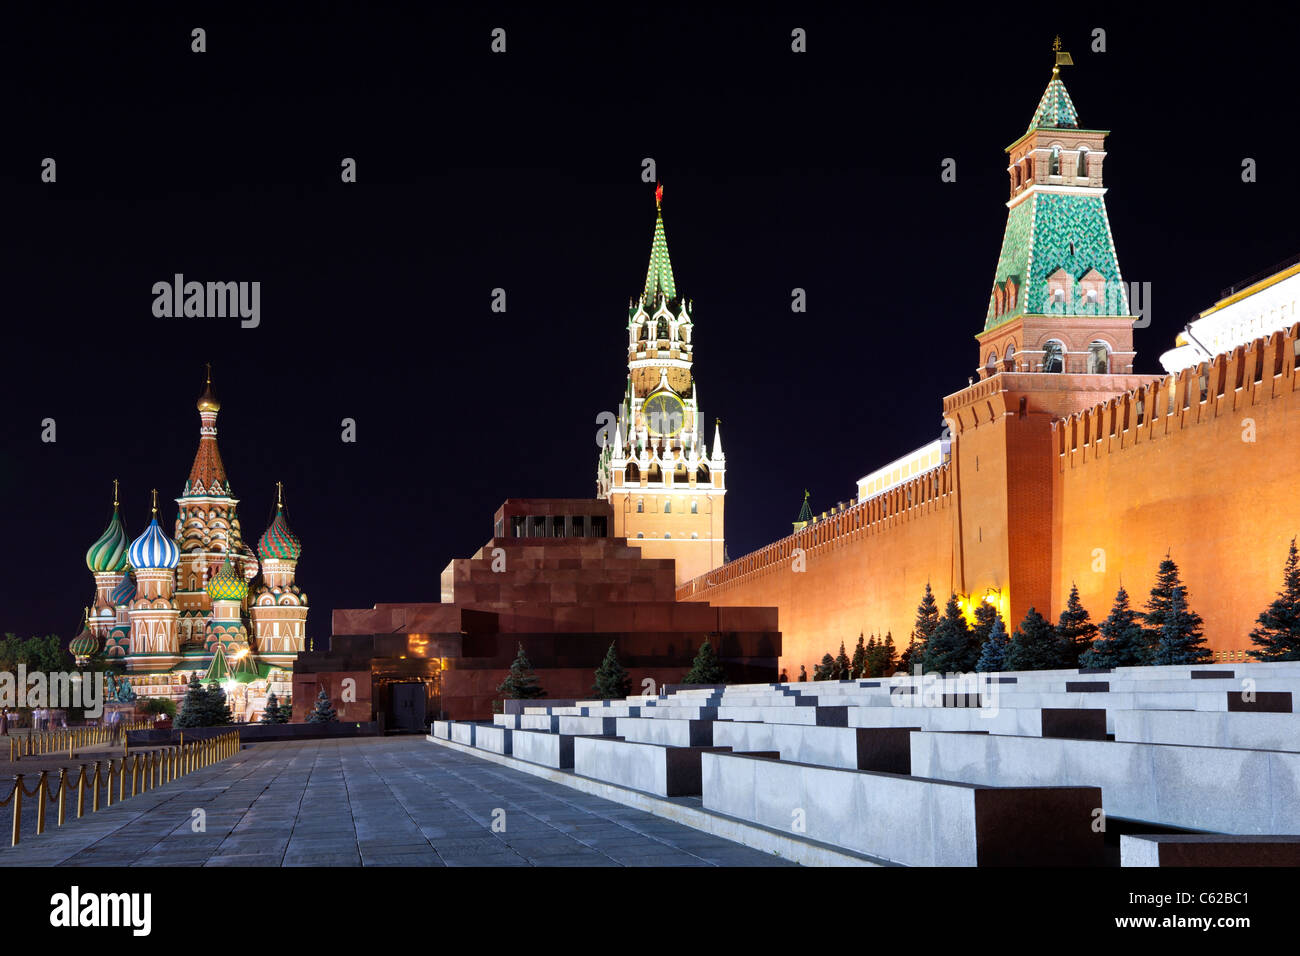 Red Square at night. View of St. Basil's Cathedral, the Spassky Tower and the Mausoleum of Lenin. Moscow. Russia. Stock Photo